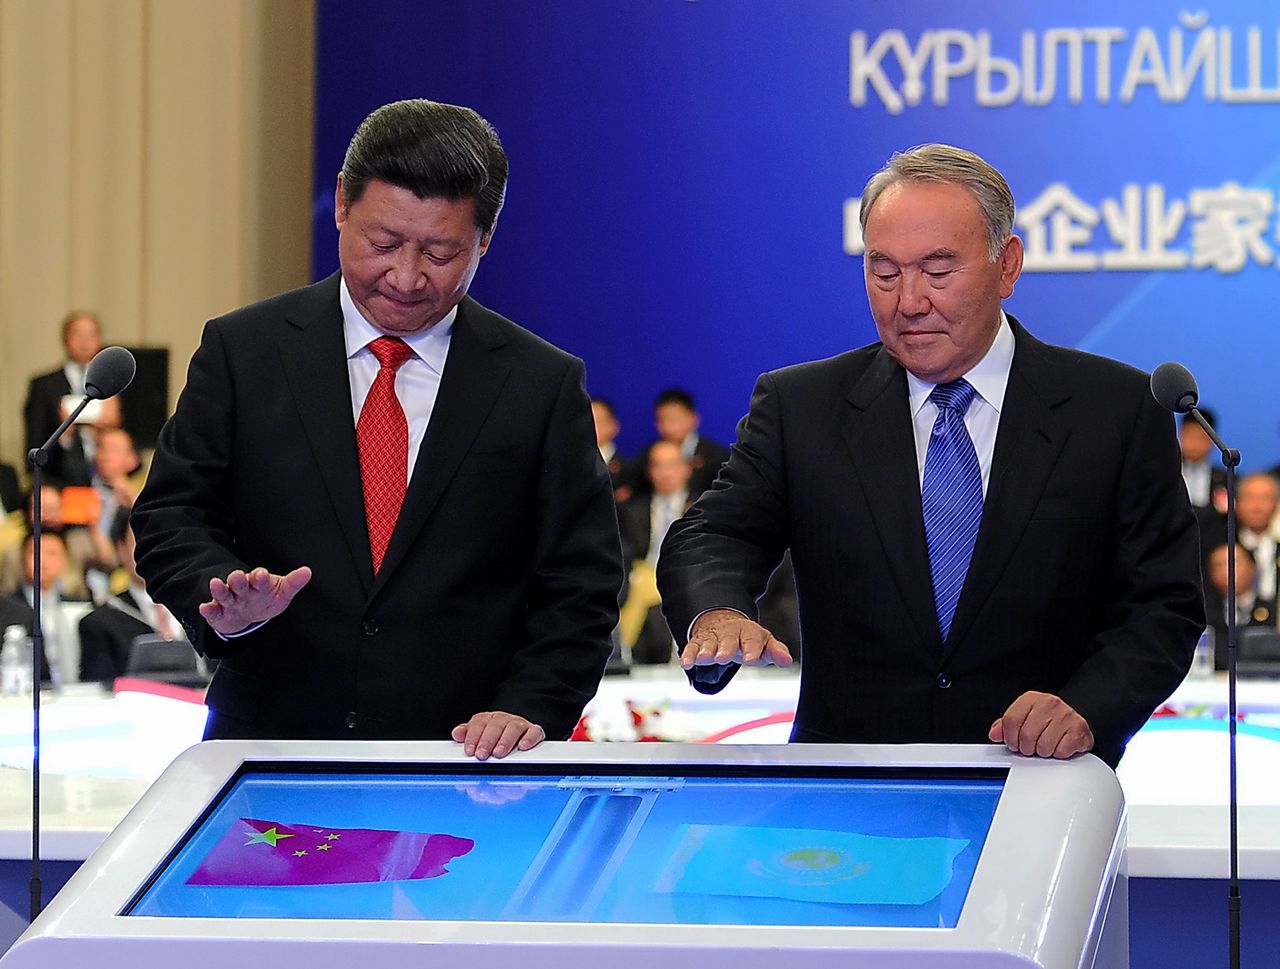 Xi Jinping and Nursultan Nazarbayev, the president of Kazakhstan, at a ceremony celebrating economic cooperation and energy agreements. Sept. 7, 2013.